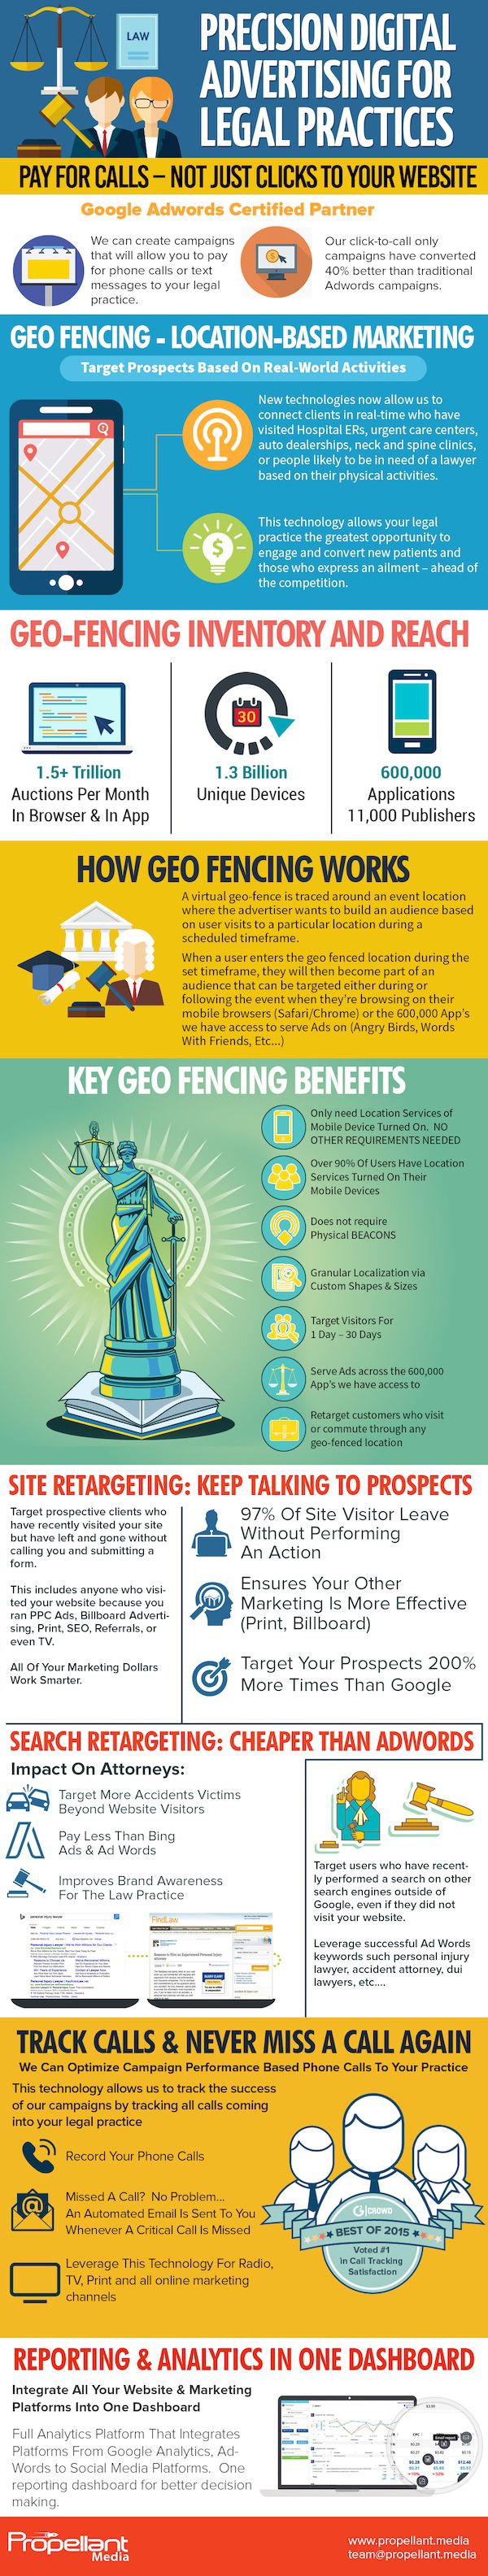 Lawyer Geofencing Marketing Infographic